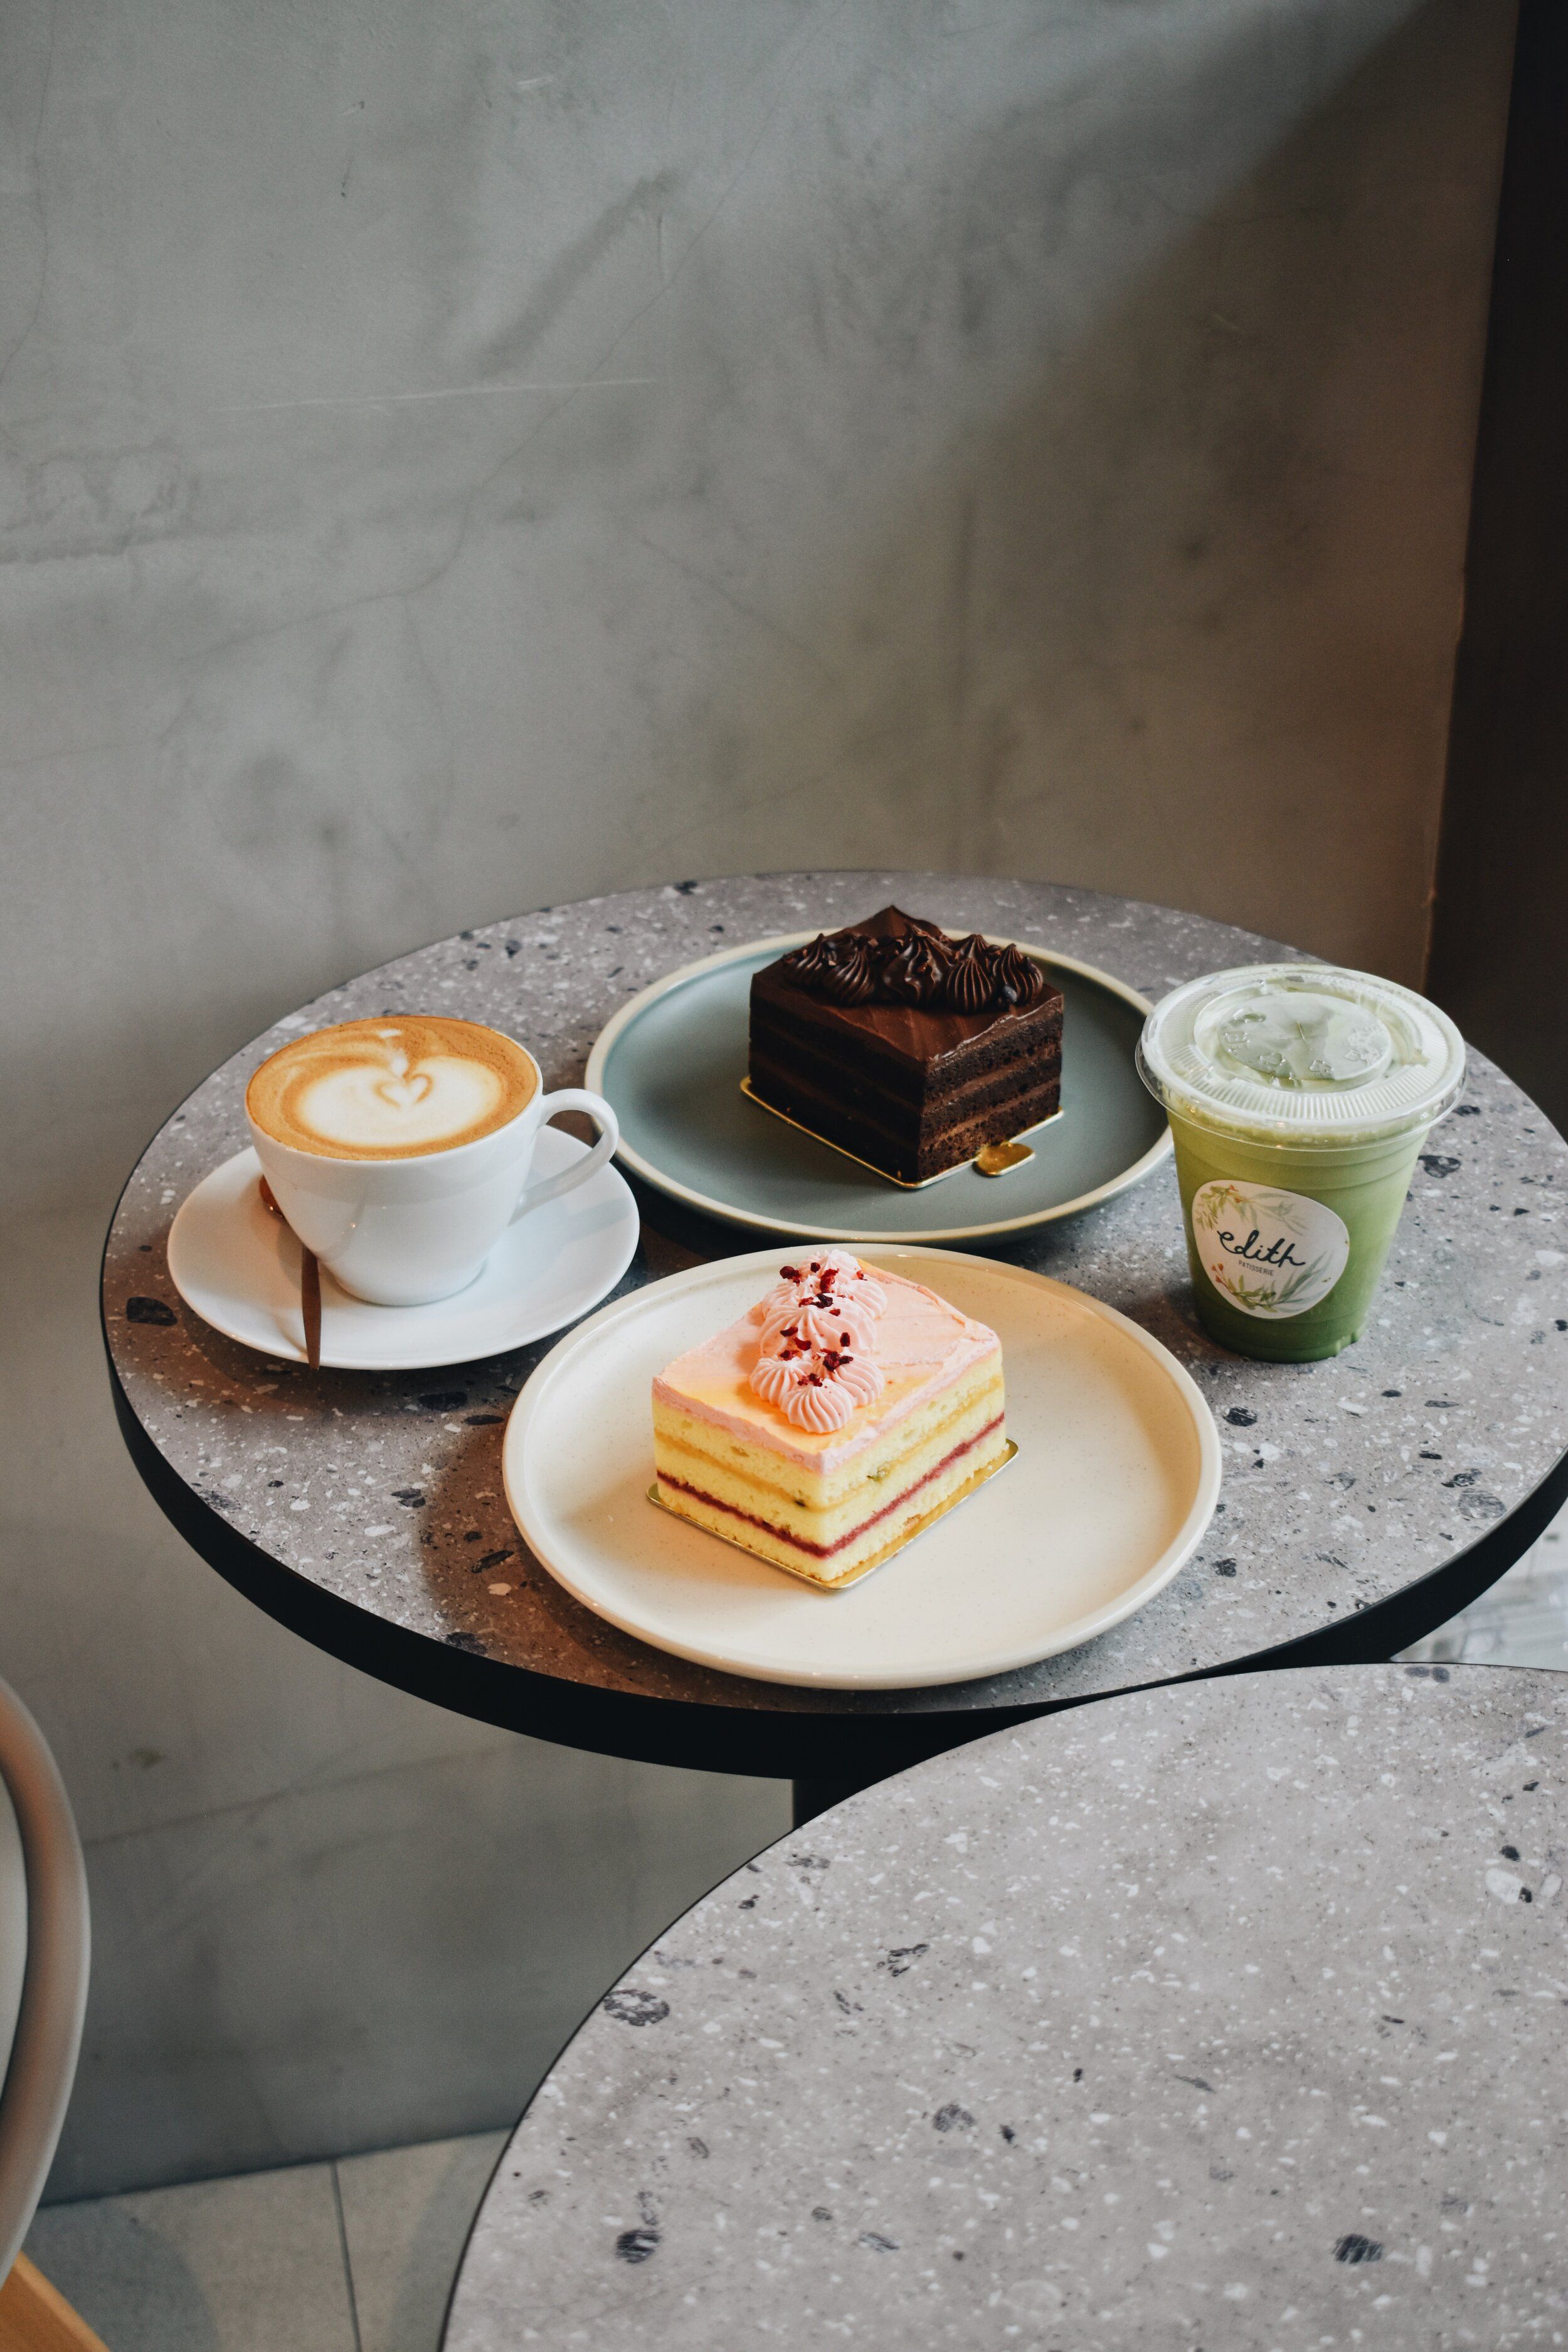 A table with a plate of cake, a cup of coffee, and a cup of green tea. - Bakery